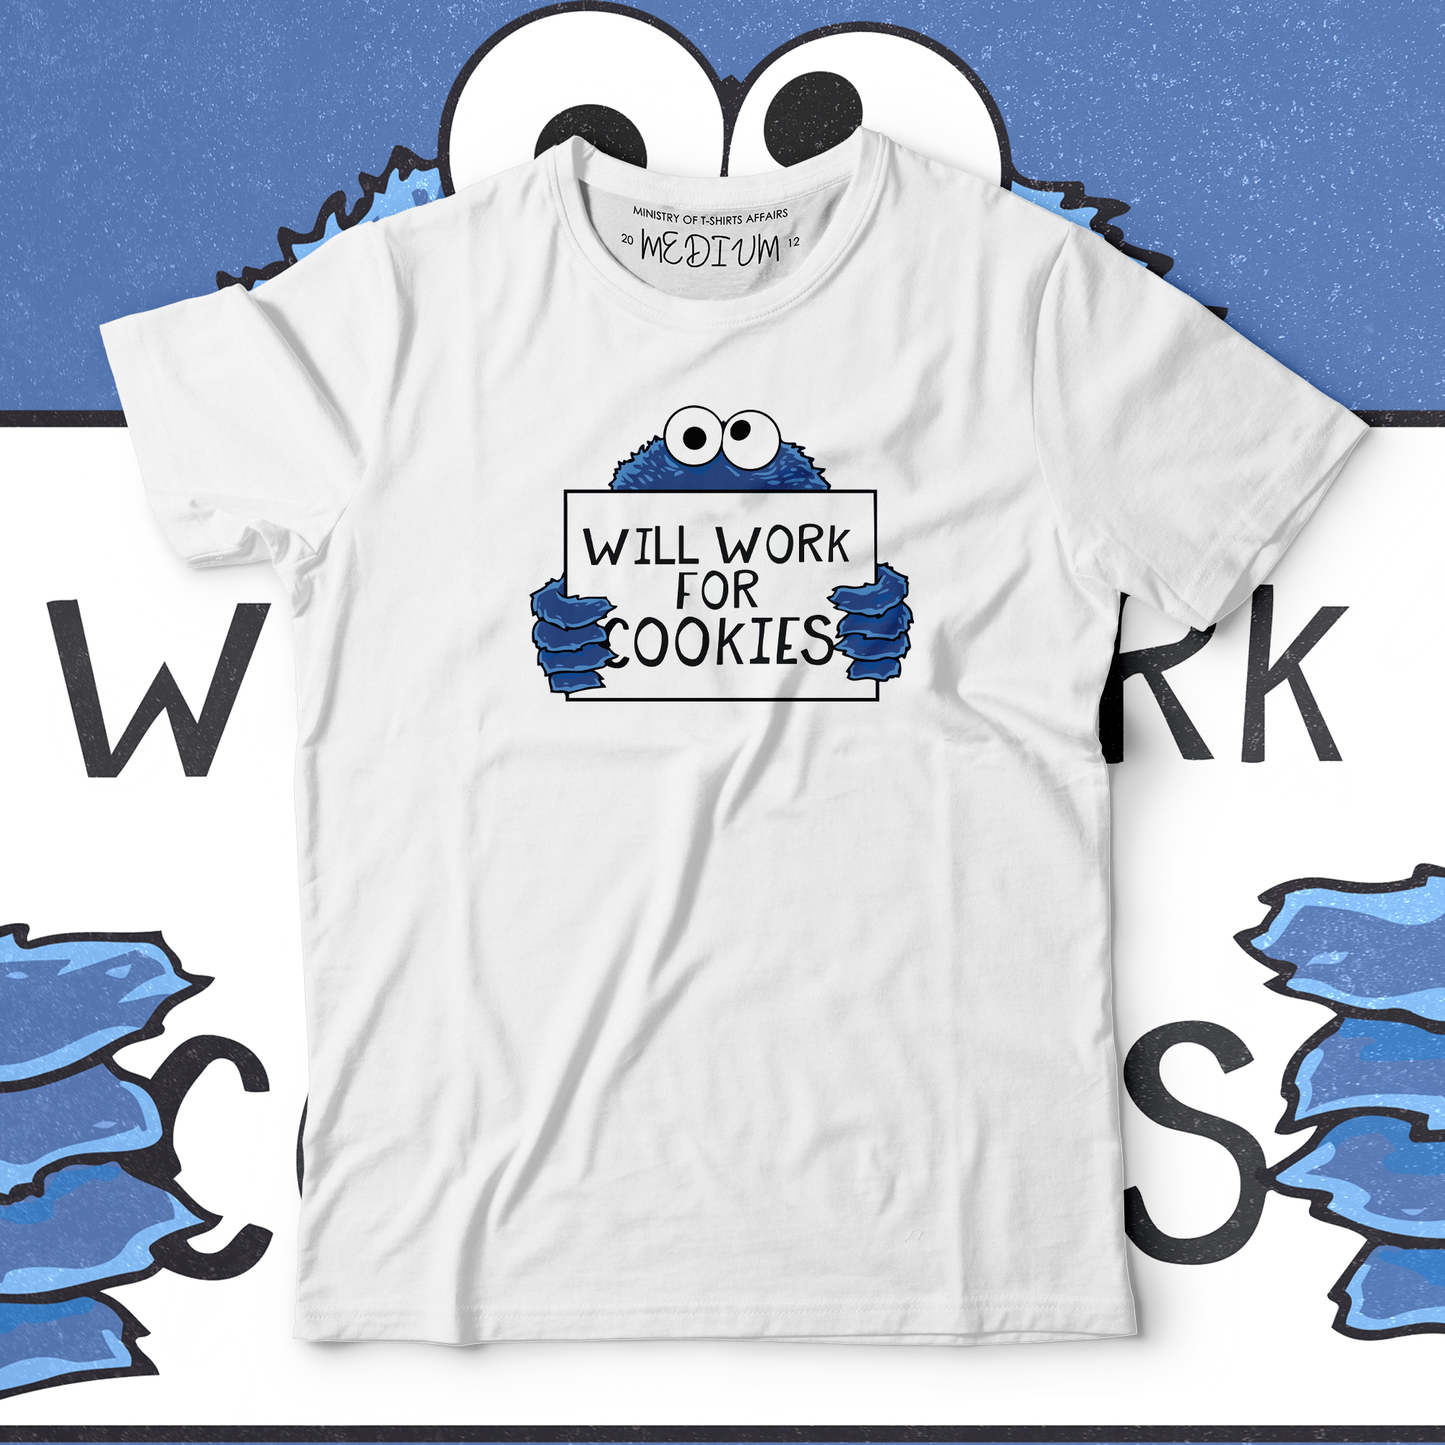 Work For Coookies - White